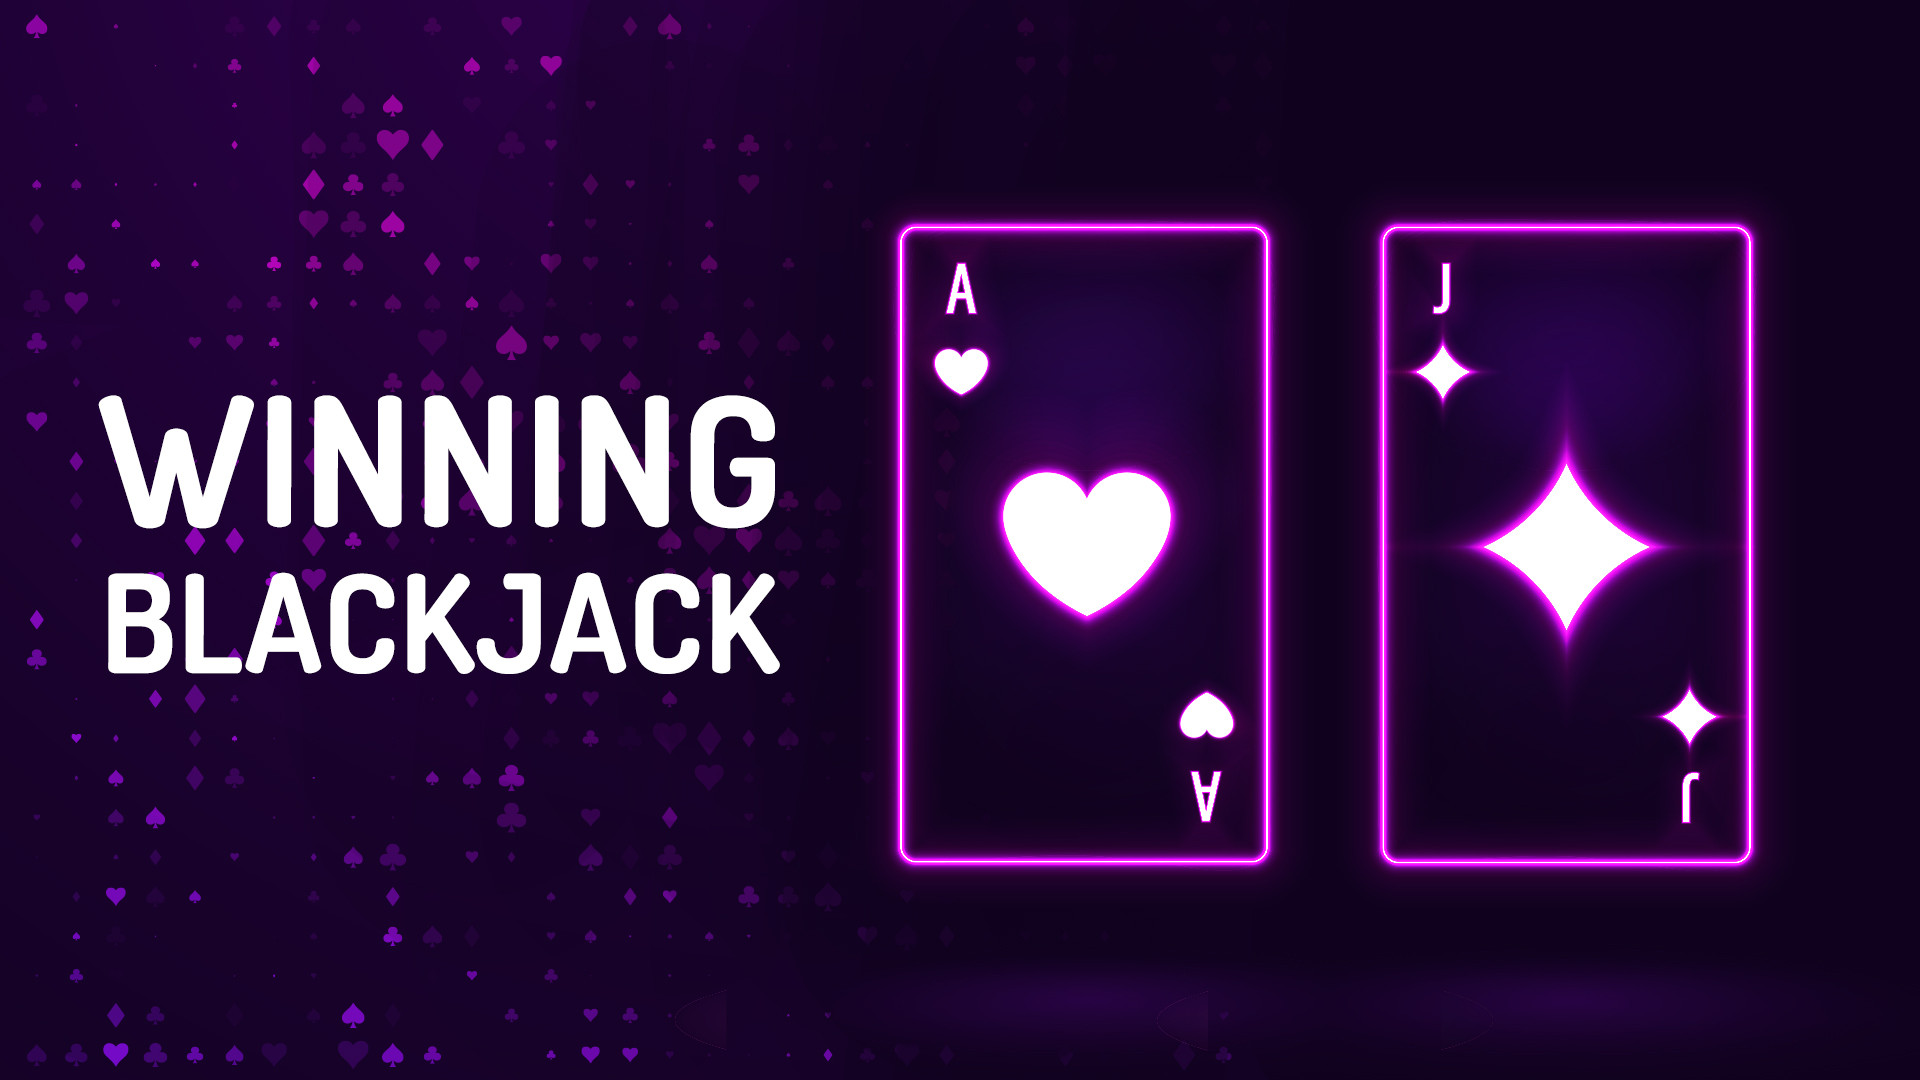 Example of a winning blackjack hand with a ace and a jack